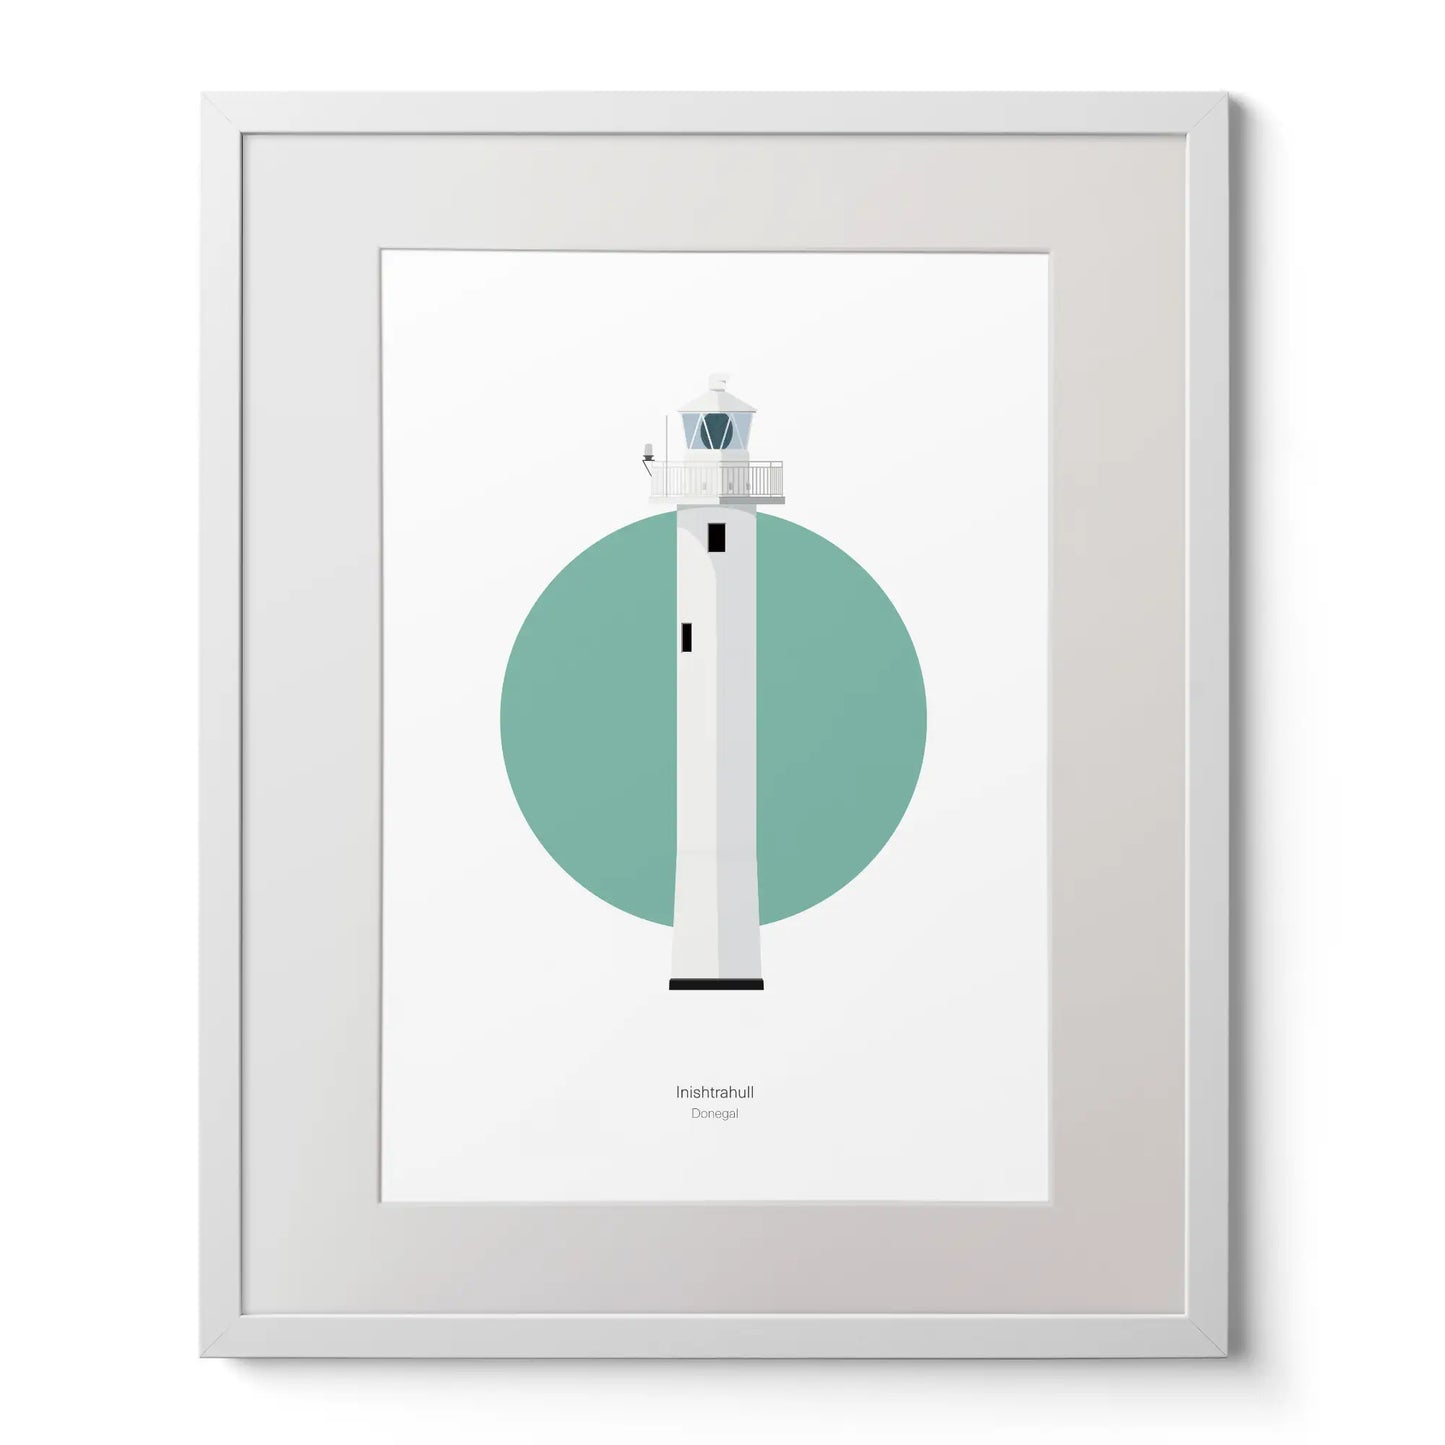 Contemporary graphic illustration of Inishtrahull lighthouse on a white background inside light blue square,  in a white frame measuring 40x50cm.